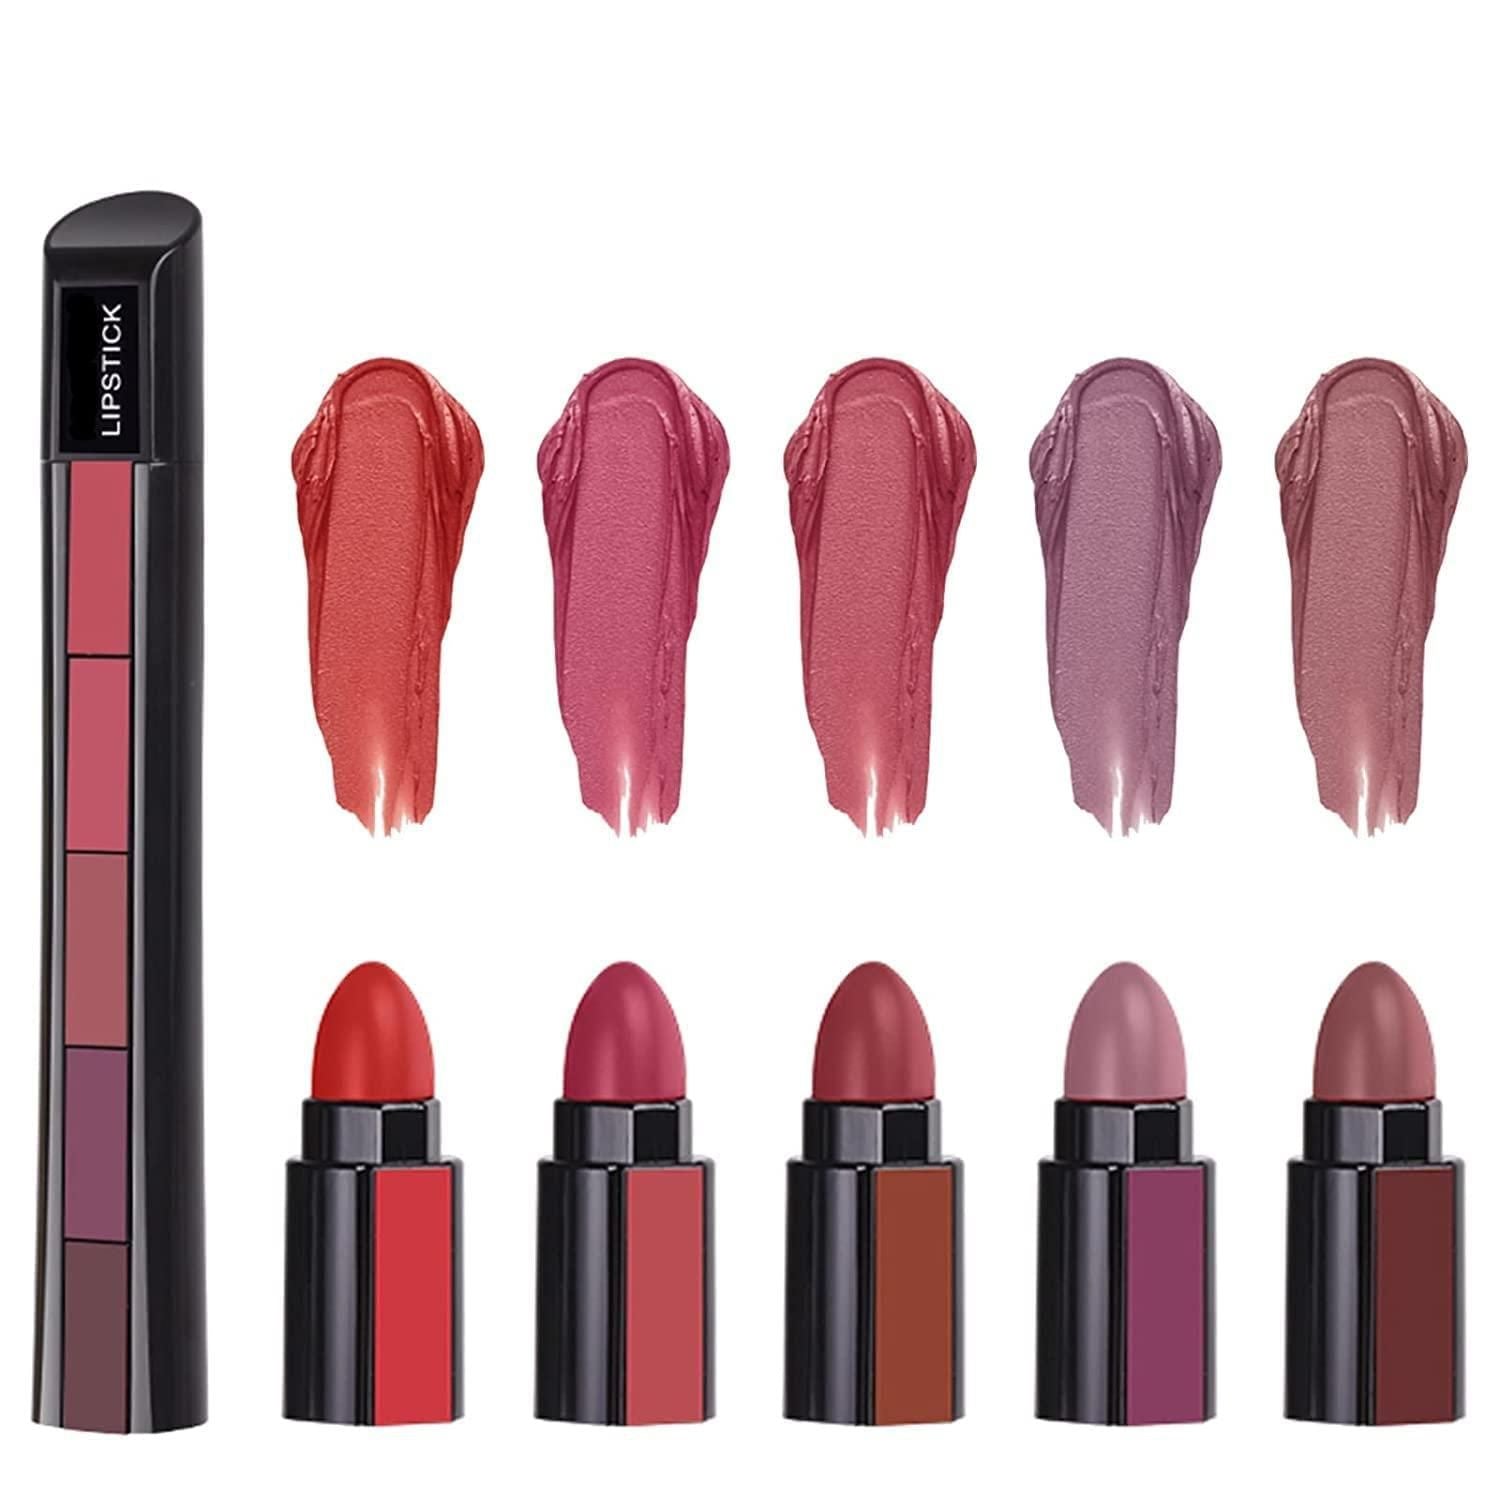 5 in 1 Lipsticks Combo Set, Red & Nude Edition Colors Sensational Fabulous Matte Finish Shades, 7.5g x2pcs - Blossom Mantra